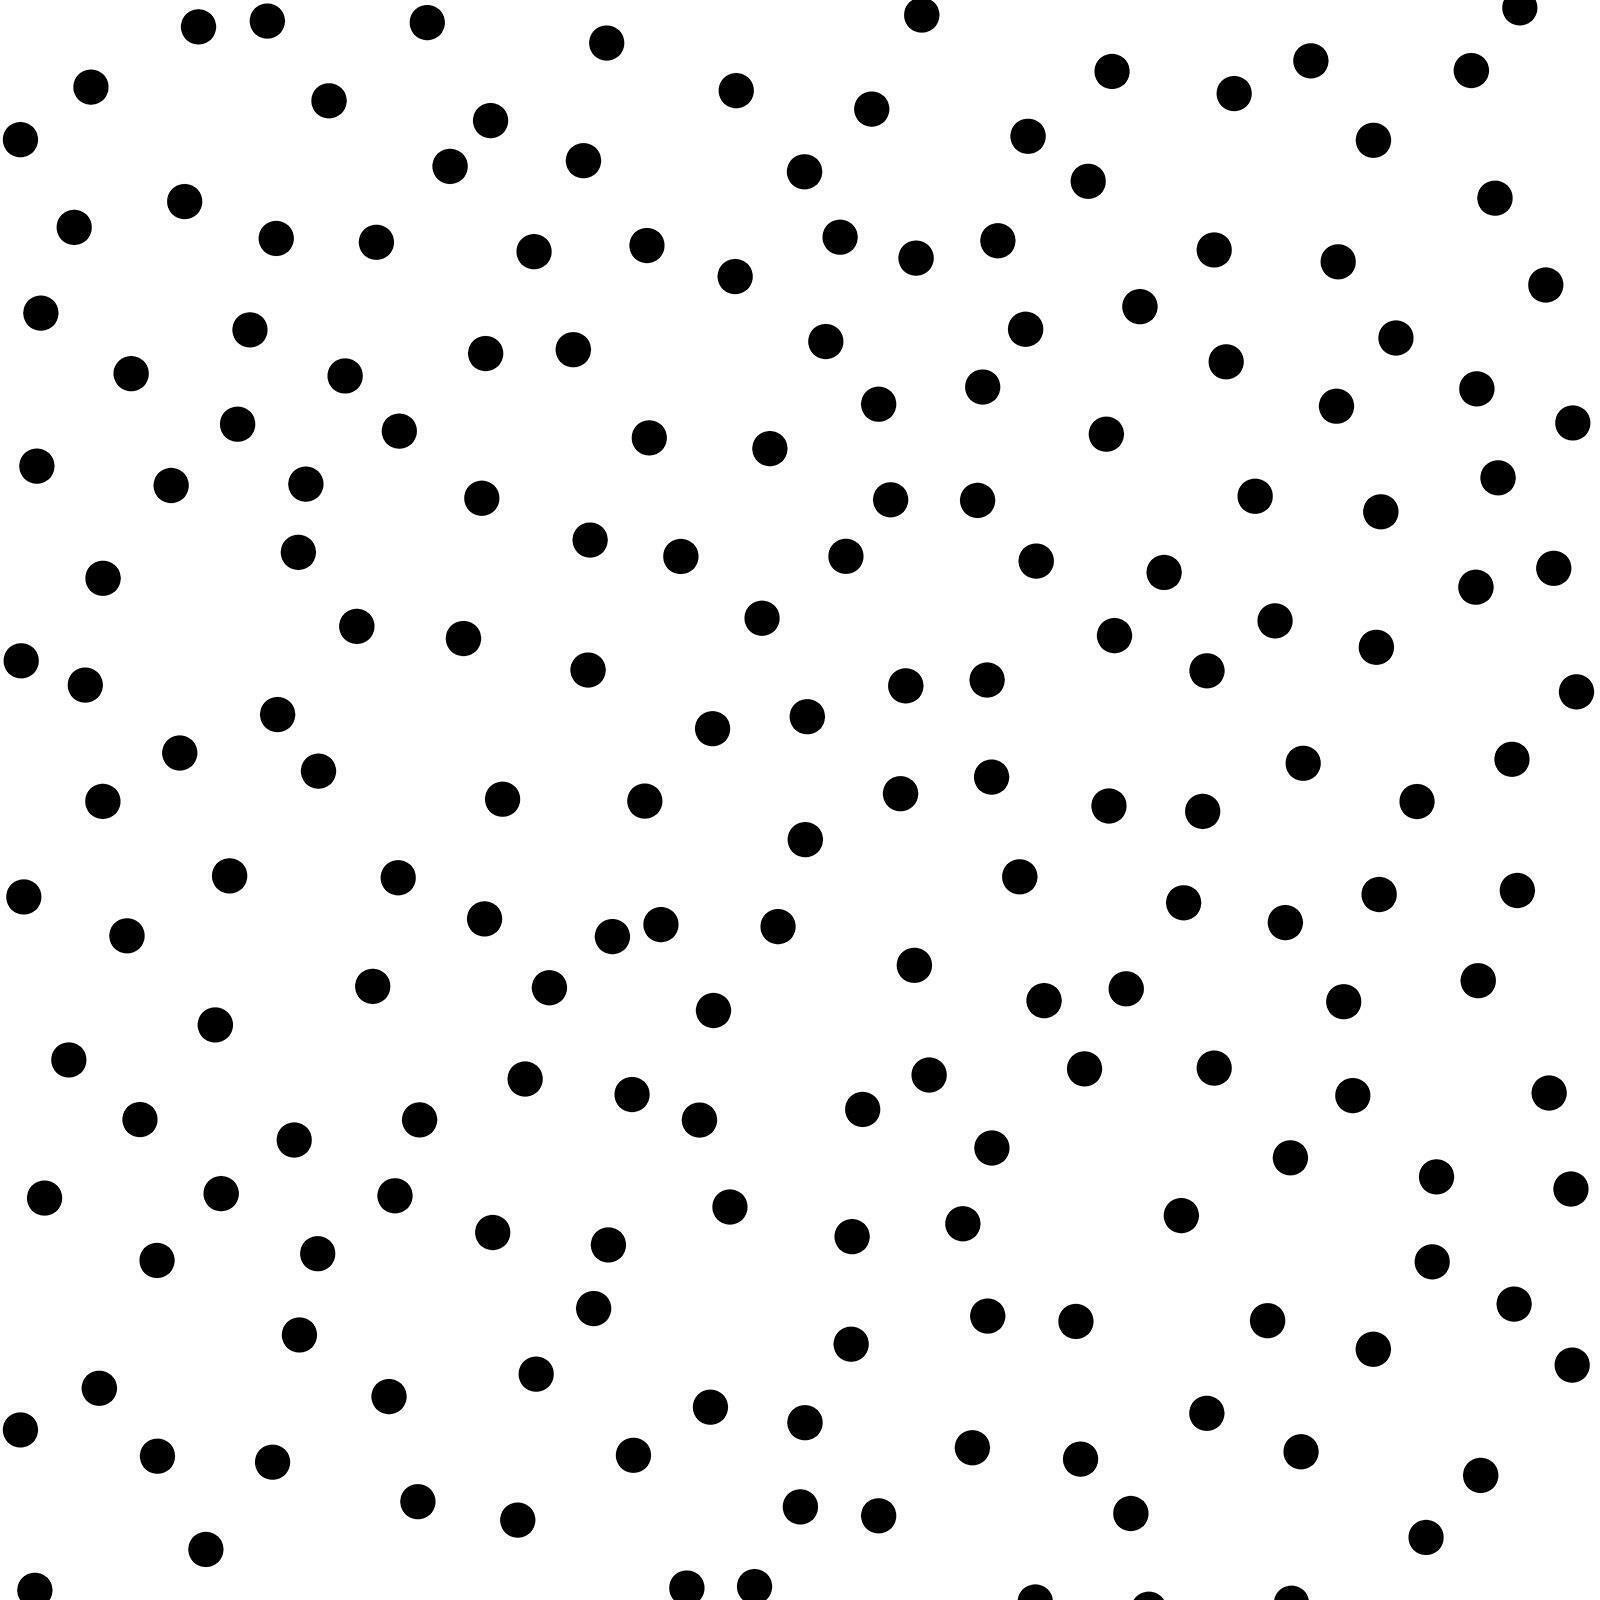 Black and White Polka Dot Wallpapers - Top Free Black and White Polka ...